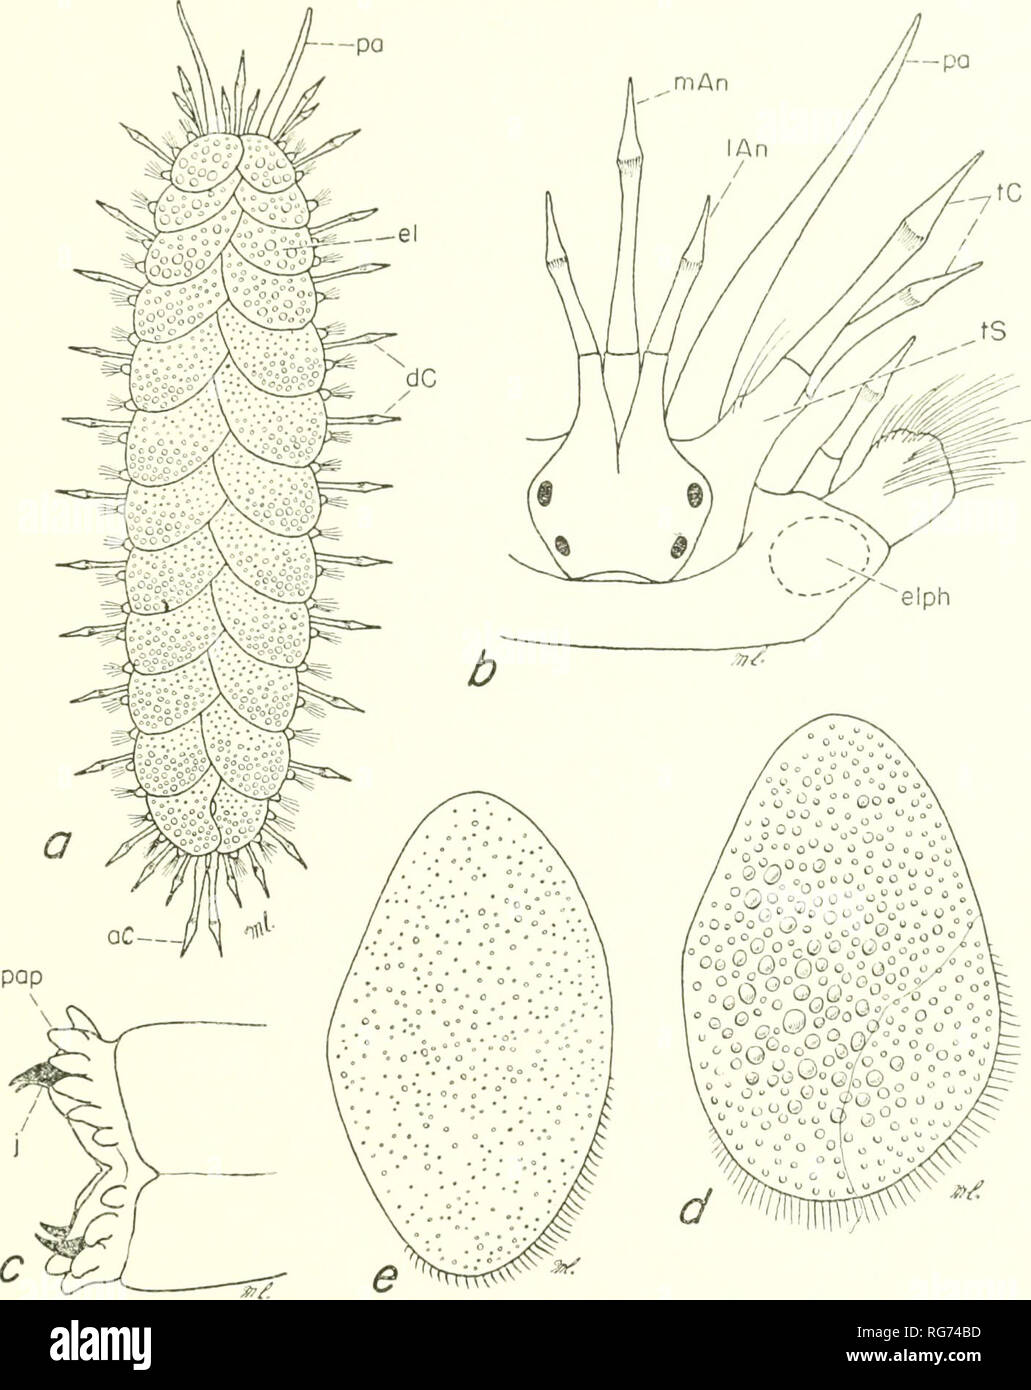 . Bulletin - United States National Museum. Science. POLYCHAETE WORMS, PART 1 19. Figure 3.—Polynoidae, a-d, Lepidonotus squamatus: a, dorsal view; b, dorsal view pro- stomium and first 2 segments, elytra removed; c, lateral view distal tip of extended proboscis; d, sixth elytron, e, Lepidonotus sublevis, fifth elytron. Genus Lepidametria Webster, 1879 Type (monotypy): Lepidametria commensalis Webster, 1879. Contains only one New England species. Lepidametria commensalis Webster, 1879 Figure 4A; Lepidametria commensalis Webster, 1879, p. 210, pi. 3, figs. 23-31.—Webster and Benedict, 1884, p.  Stock Photo